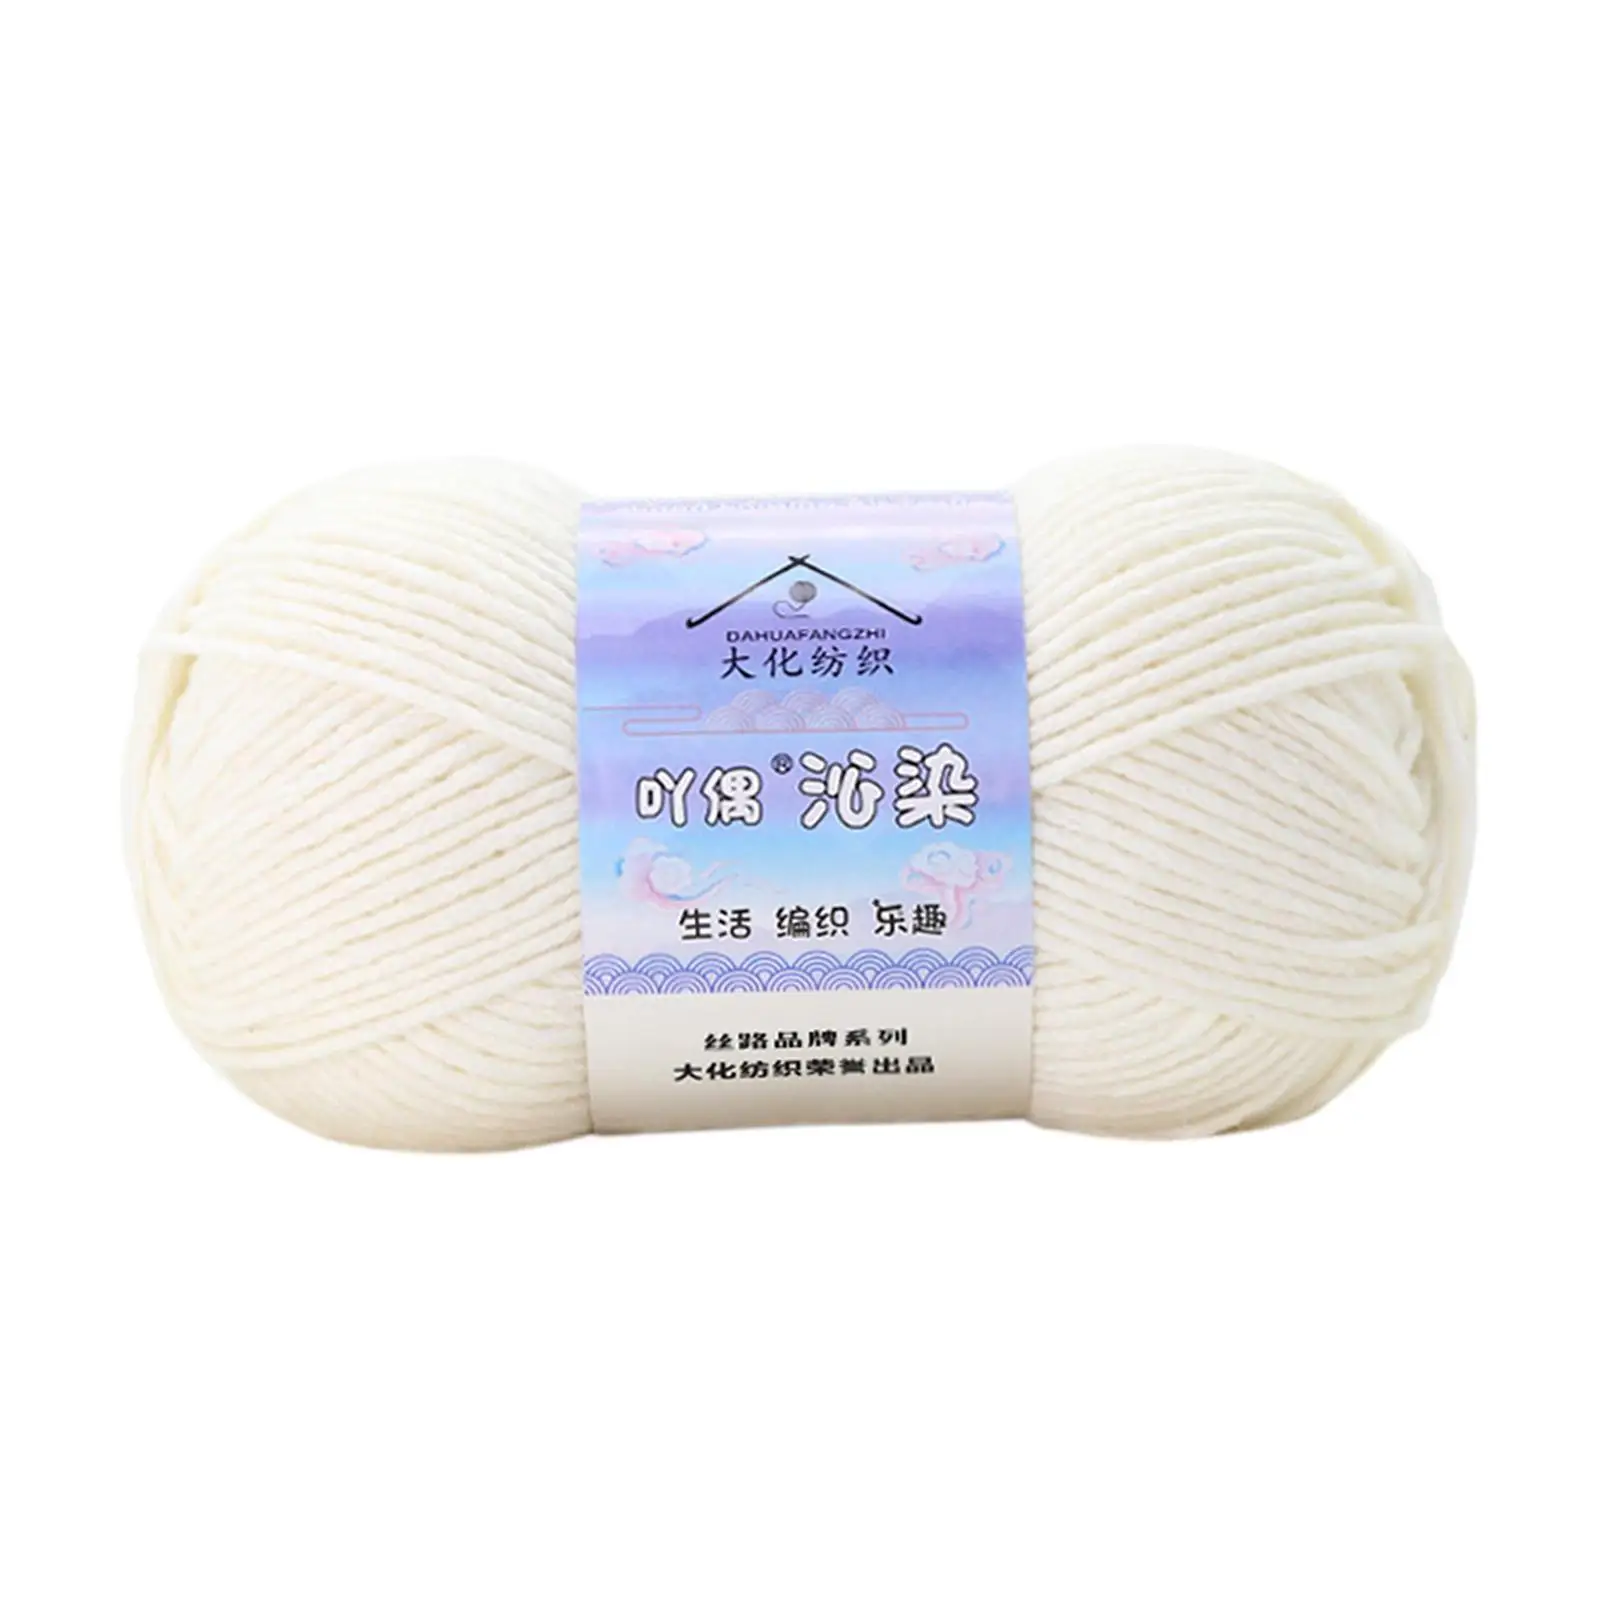 Knitting Yarn Hand Knitting Supplies Adults 175M/574ft Crochet Thread for Hats Scarves Hand Needlework Beginners Knitting